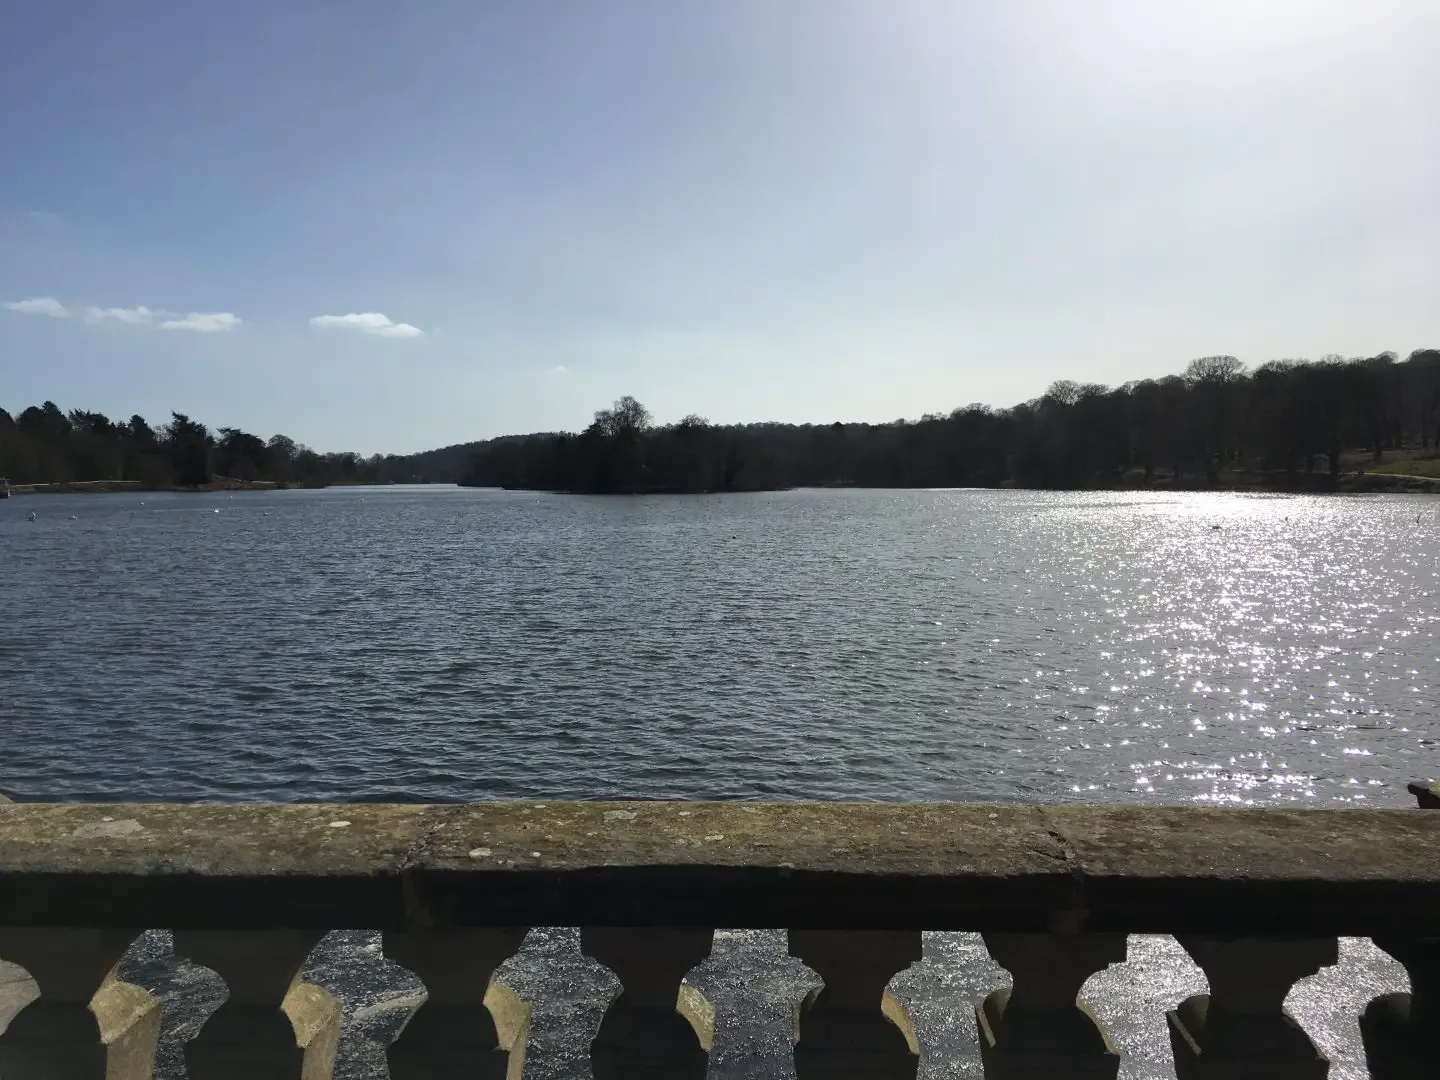 A day out in Staffordshire enjoying Trentham lake 